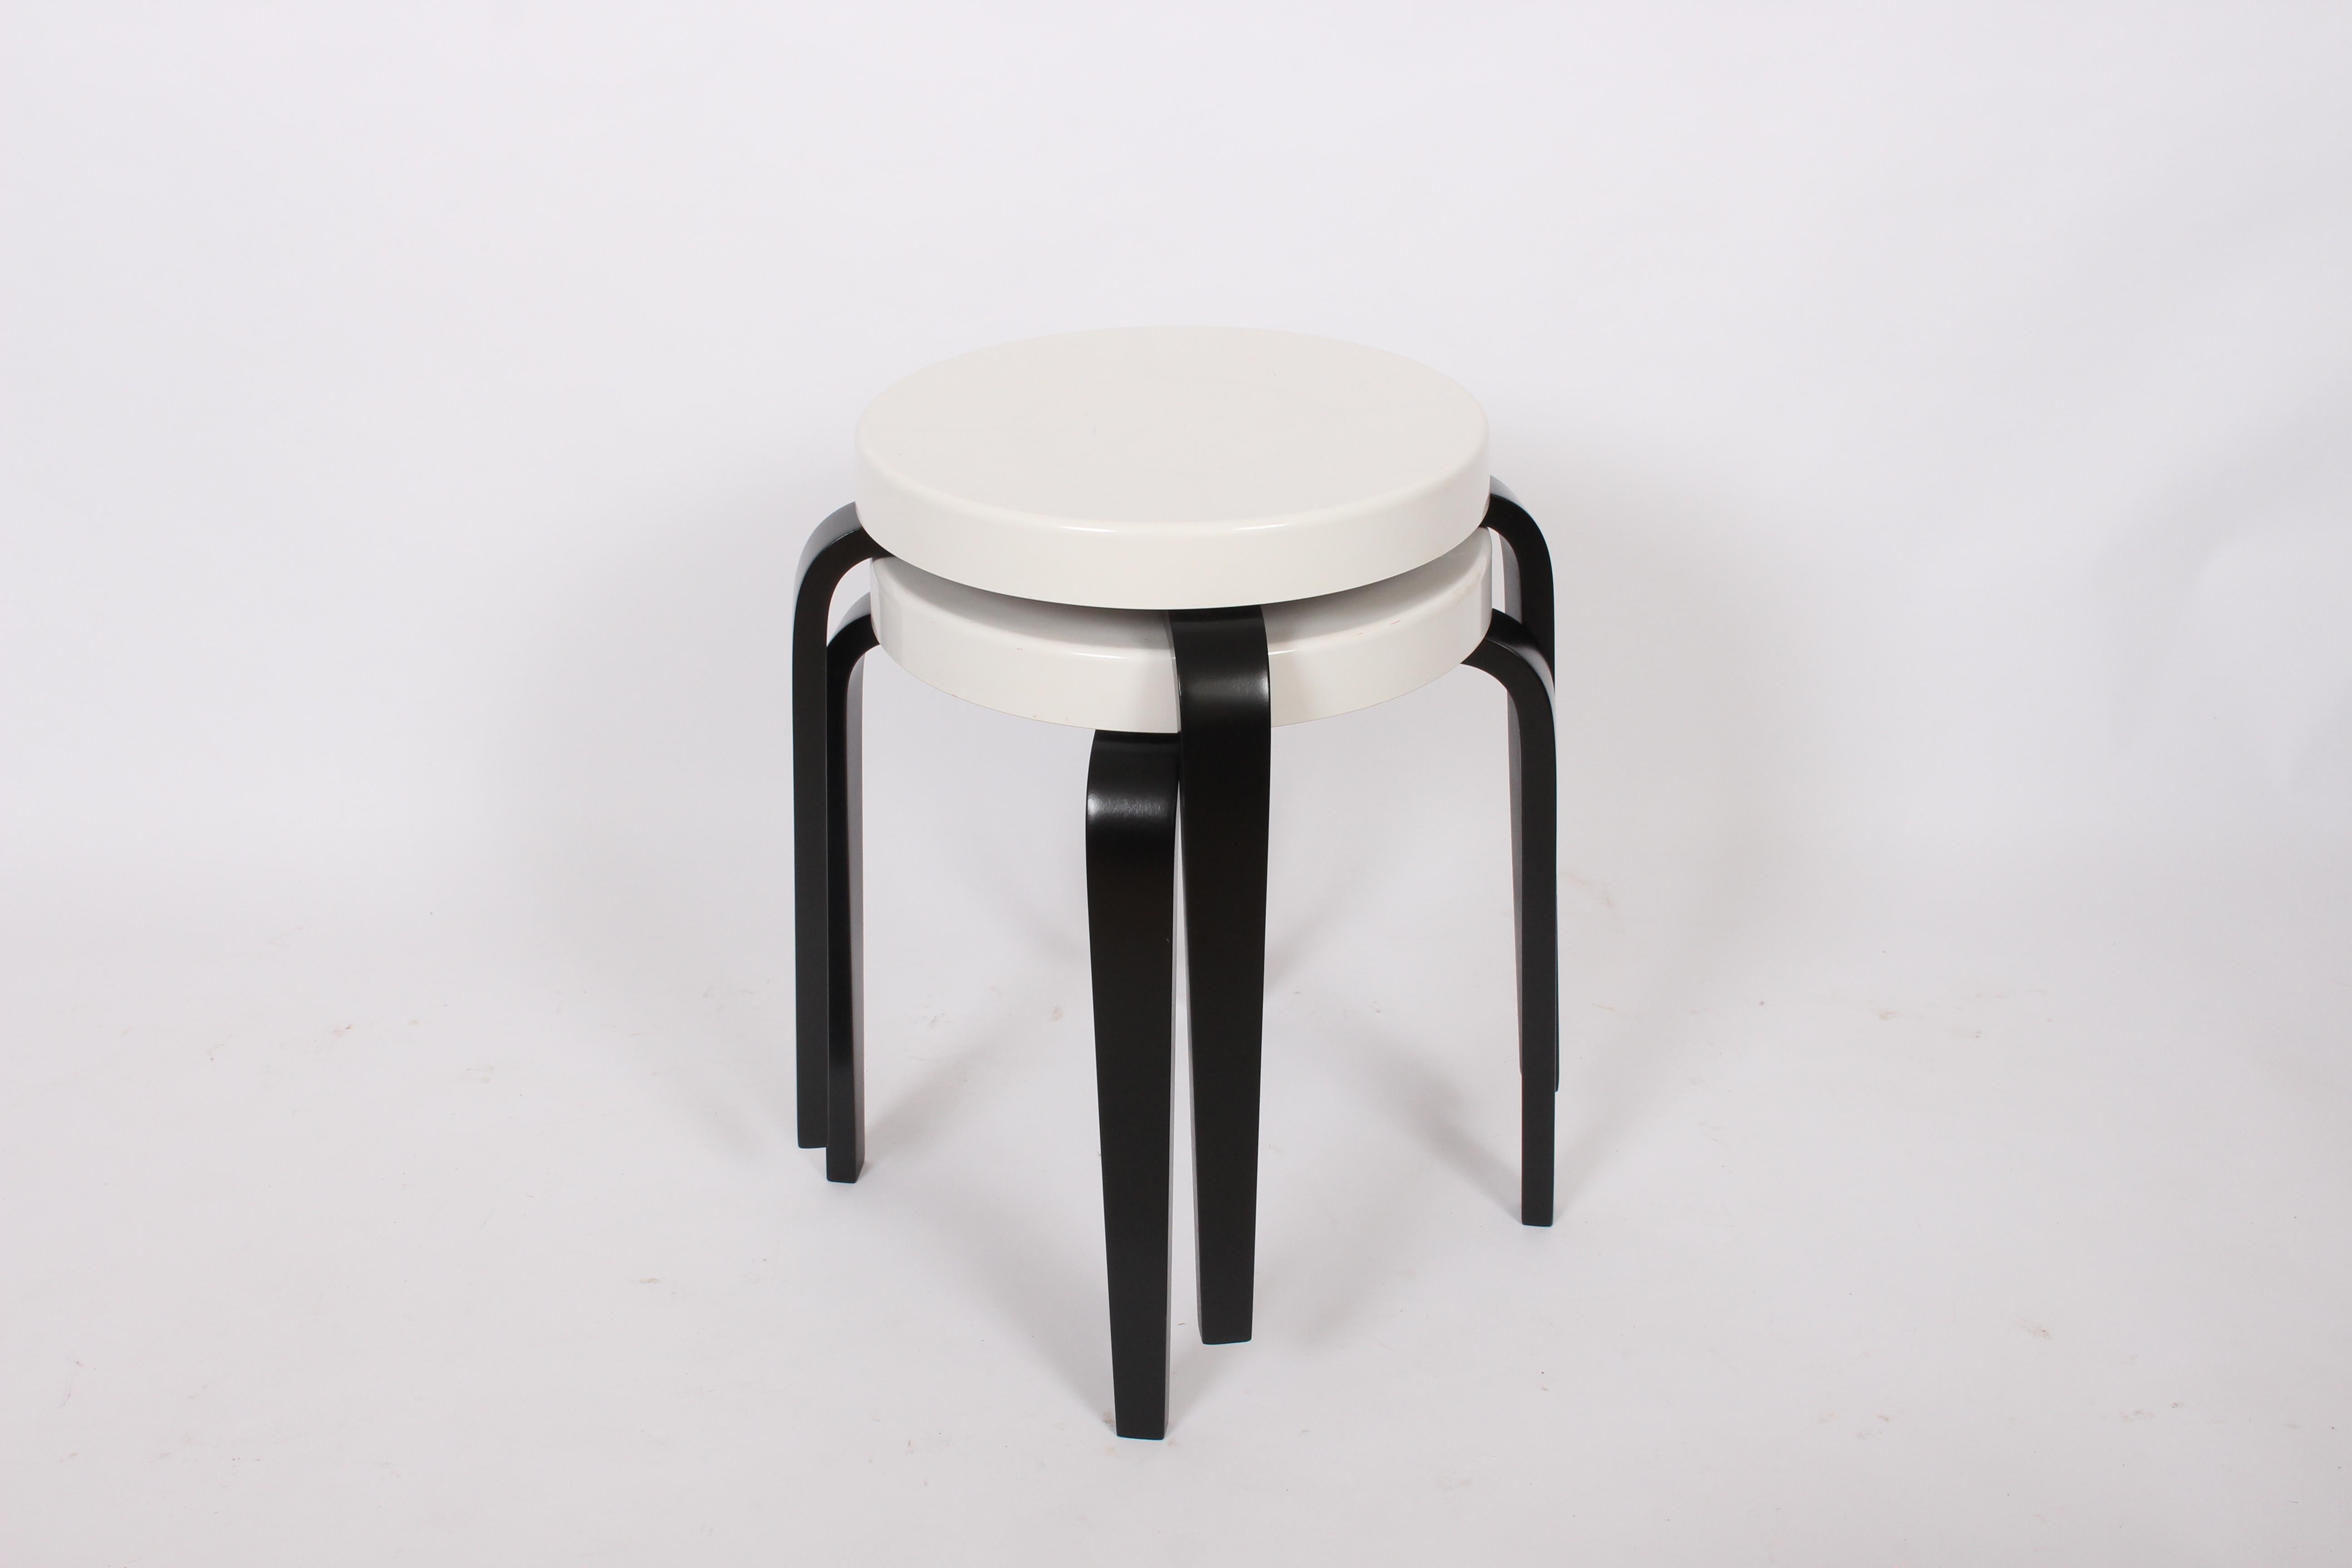 Pair of Thonet White and Black Bakelite Stacking Stools, 1930s For Sale 6